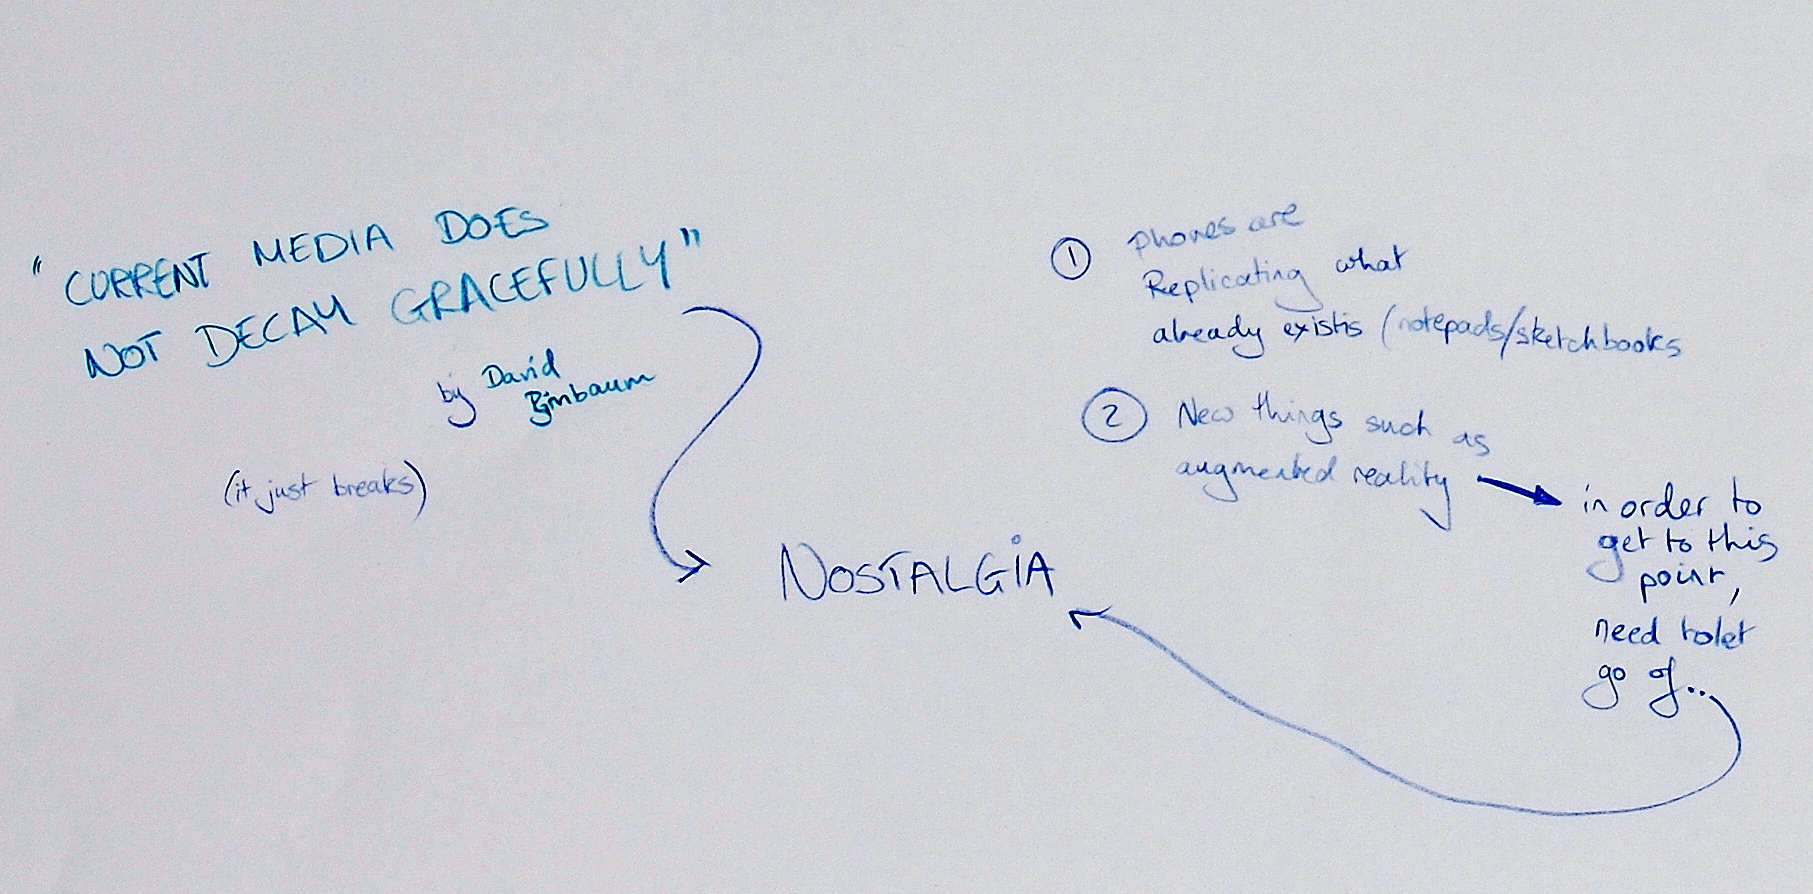 MEX creative team's working notes on graceful decay in digital media